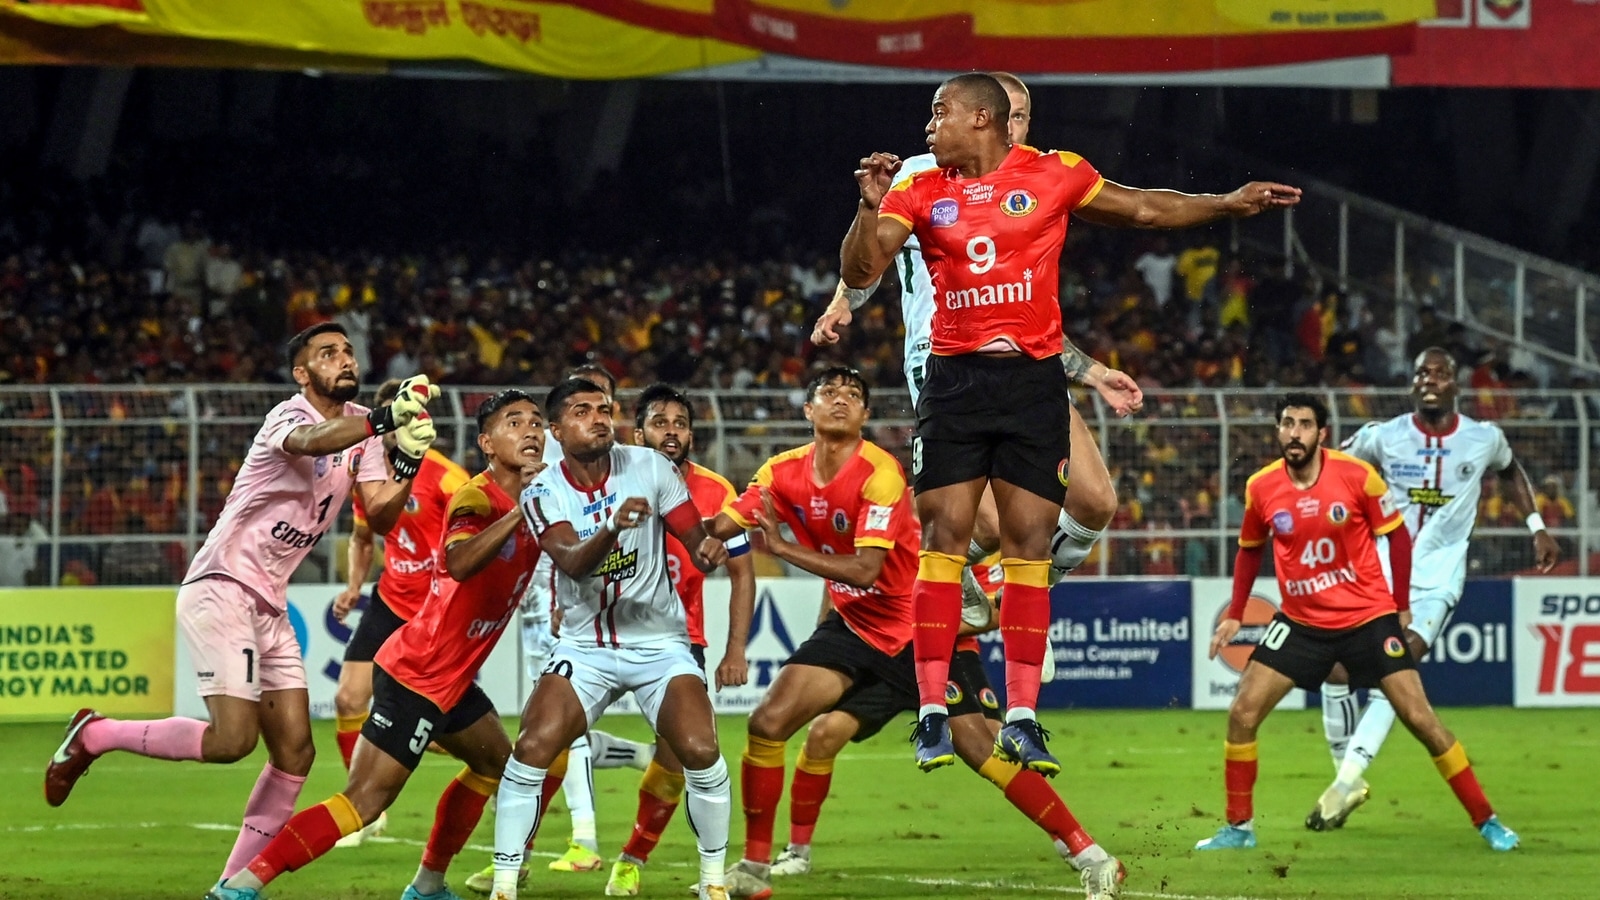 Wobbly defence could mean high-scoring ISL Kolkata derby